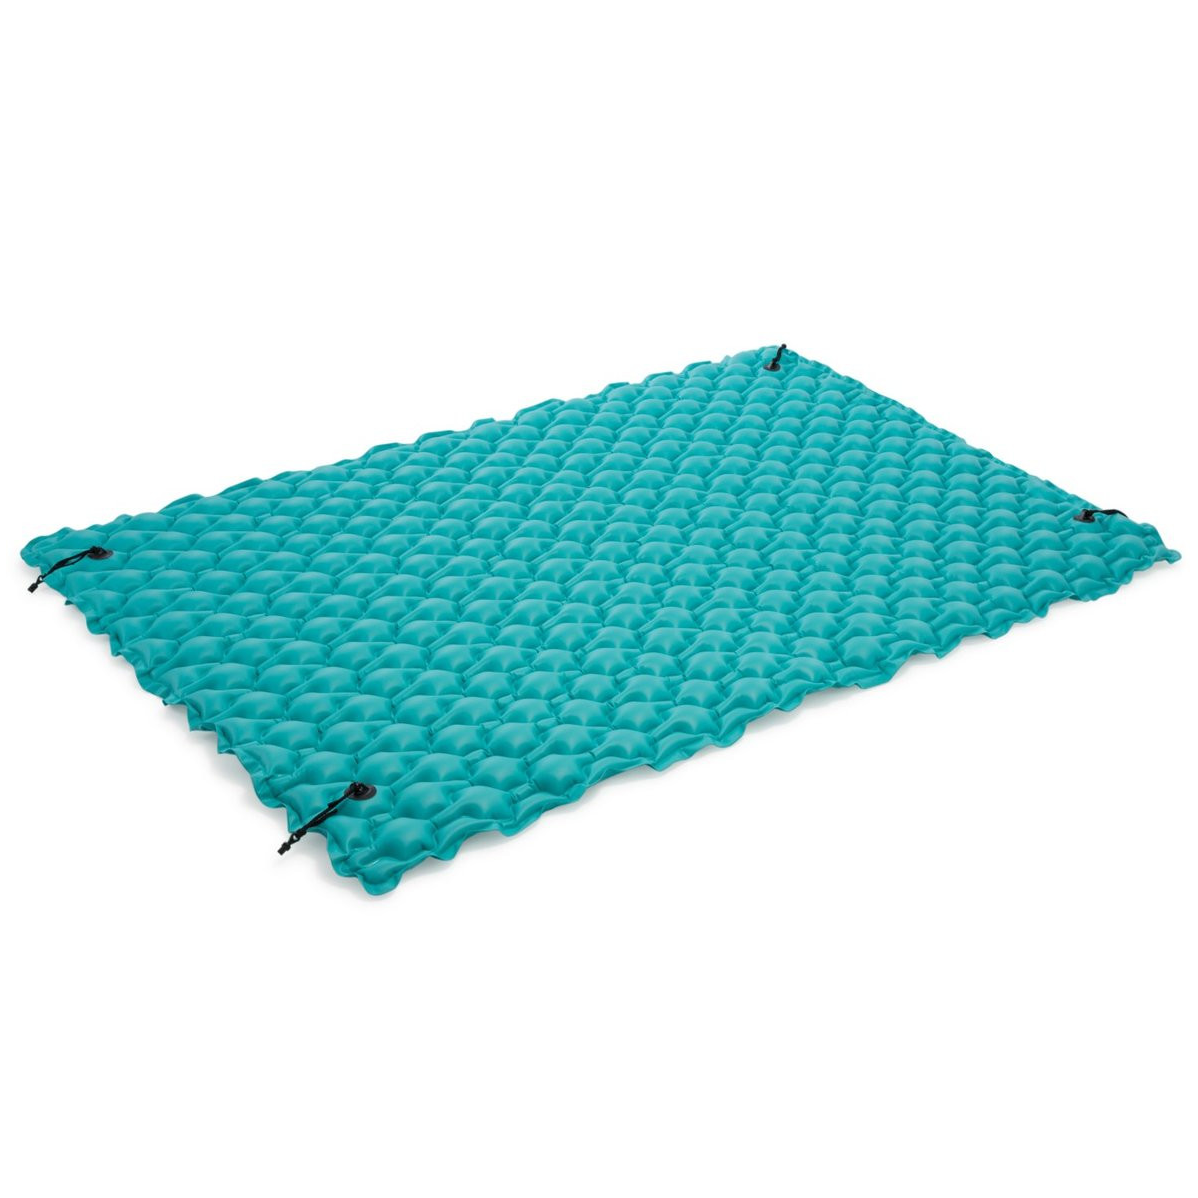 Giant Inflatable Floating Mat 114 in x 84 in